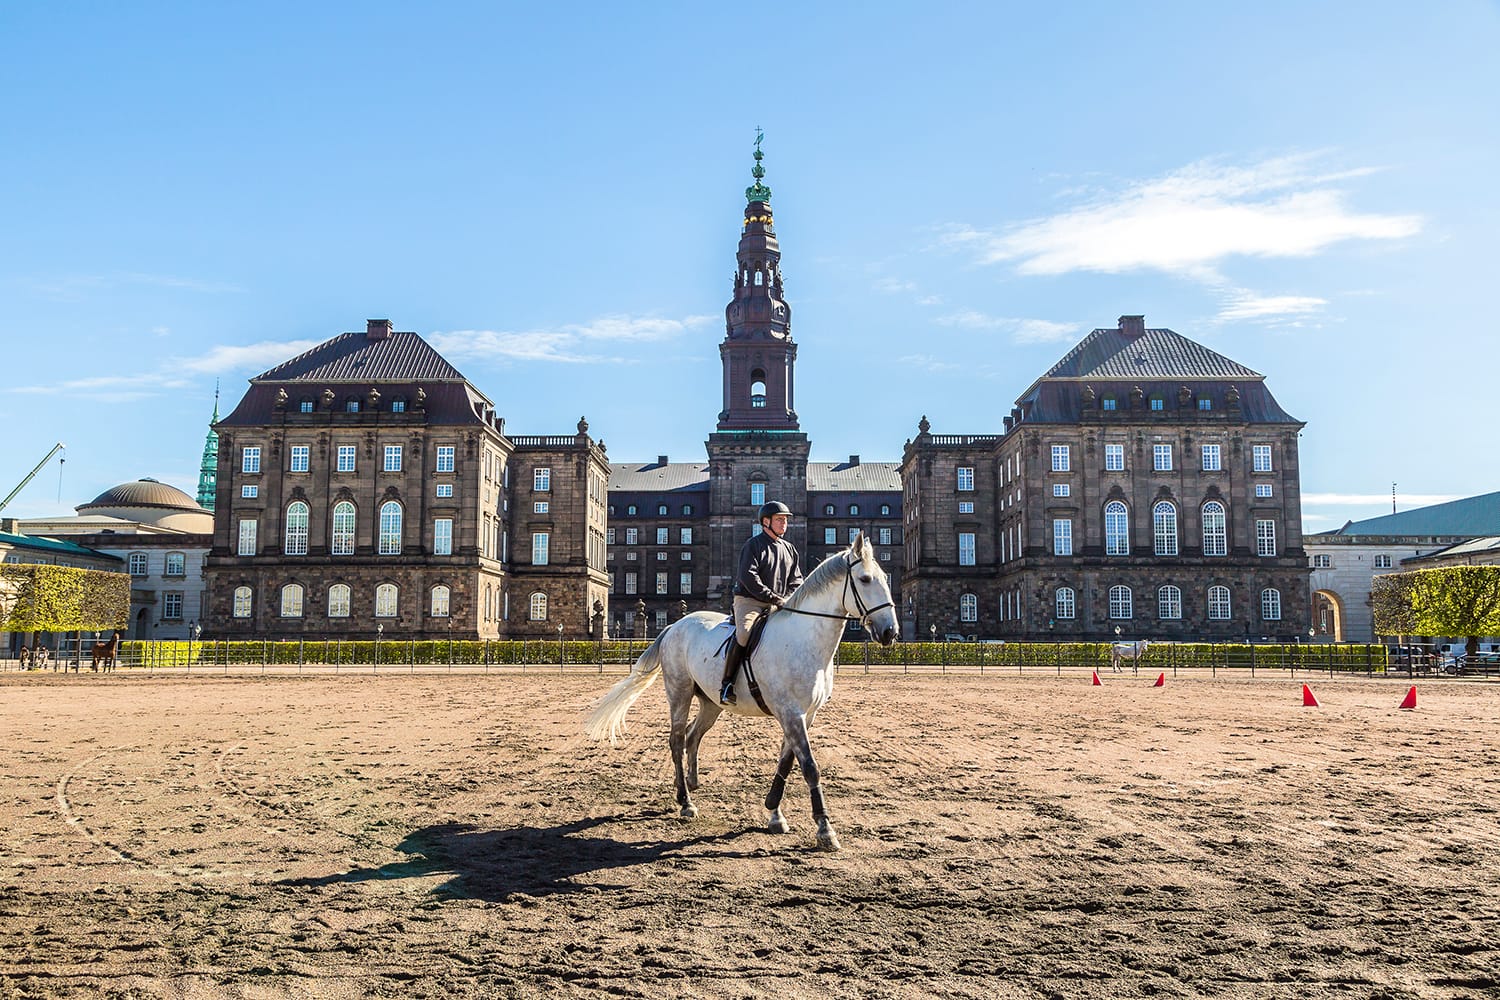 The royal stables at the Christiansborg palace in Copenhagen, Denmark